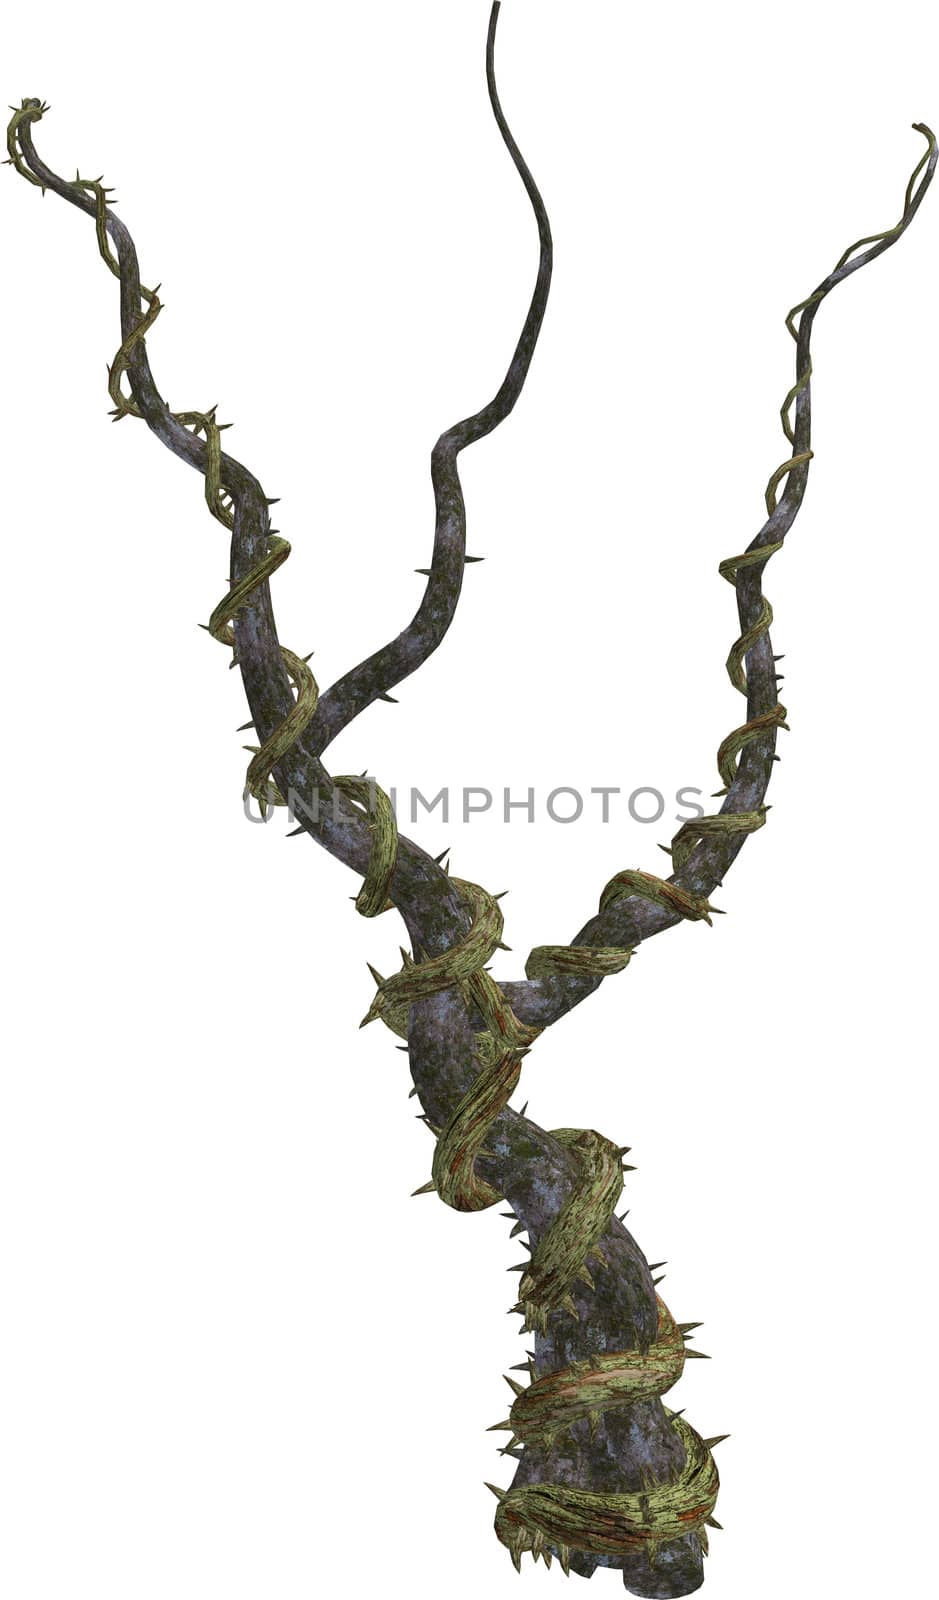 Climbing vines with thornes on a white background